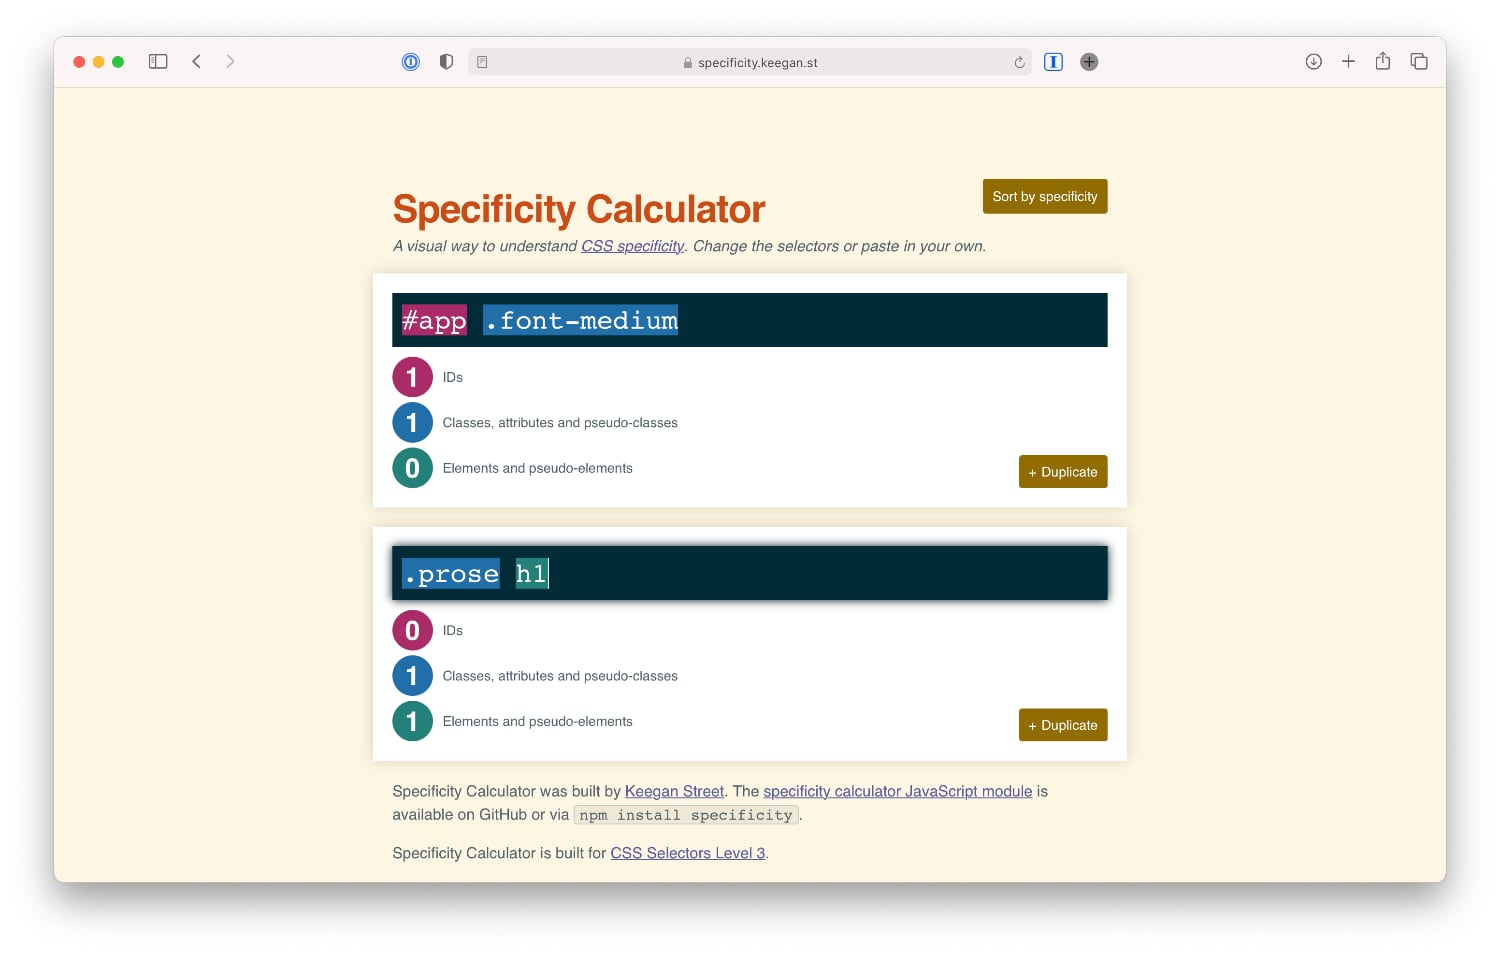 CSS Specificity calculator results